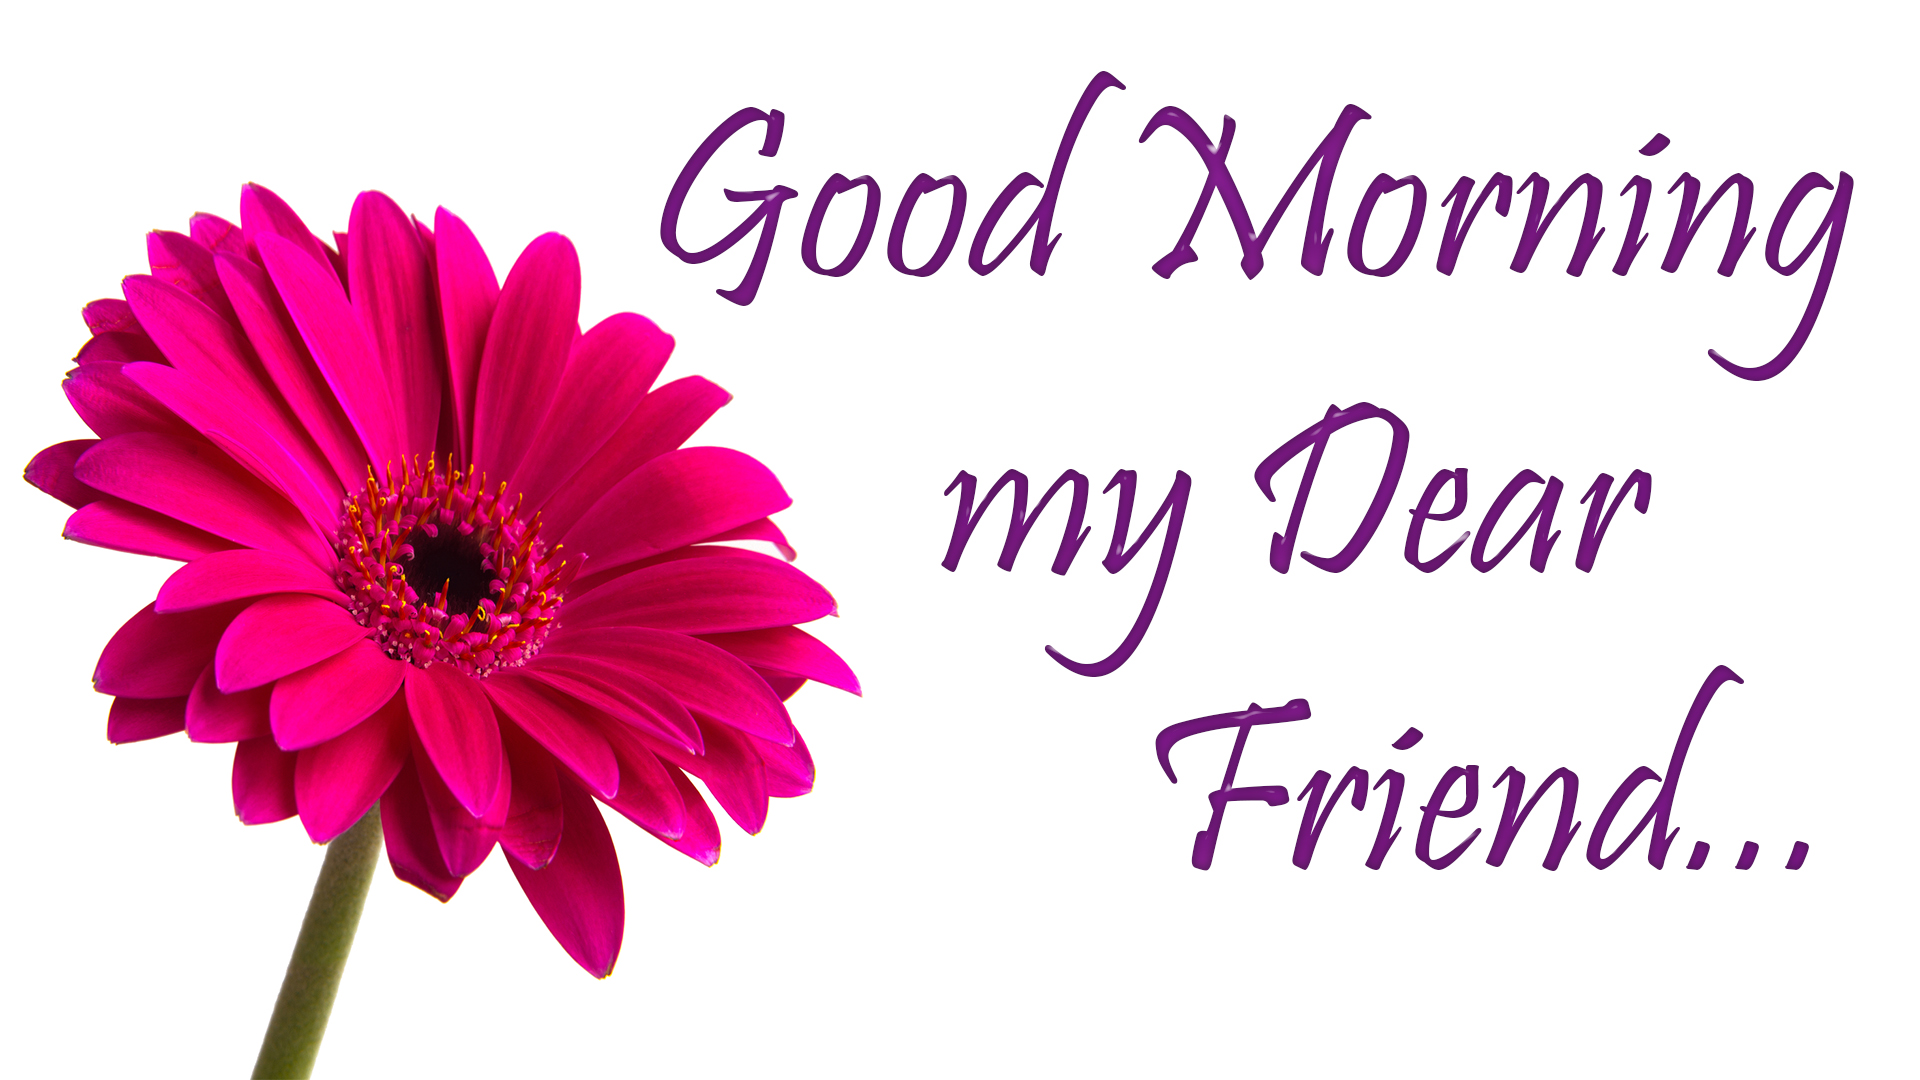 Good Morning Images For Friends | Morning Greetings & Wishes